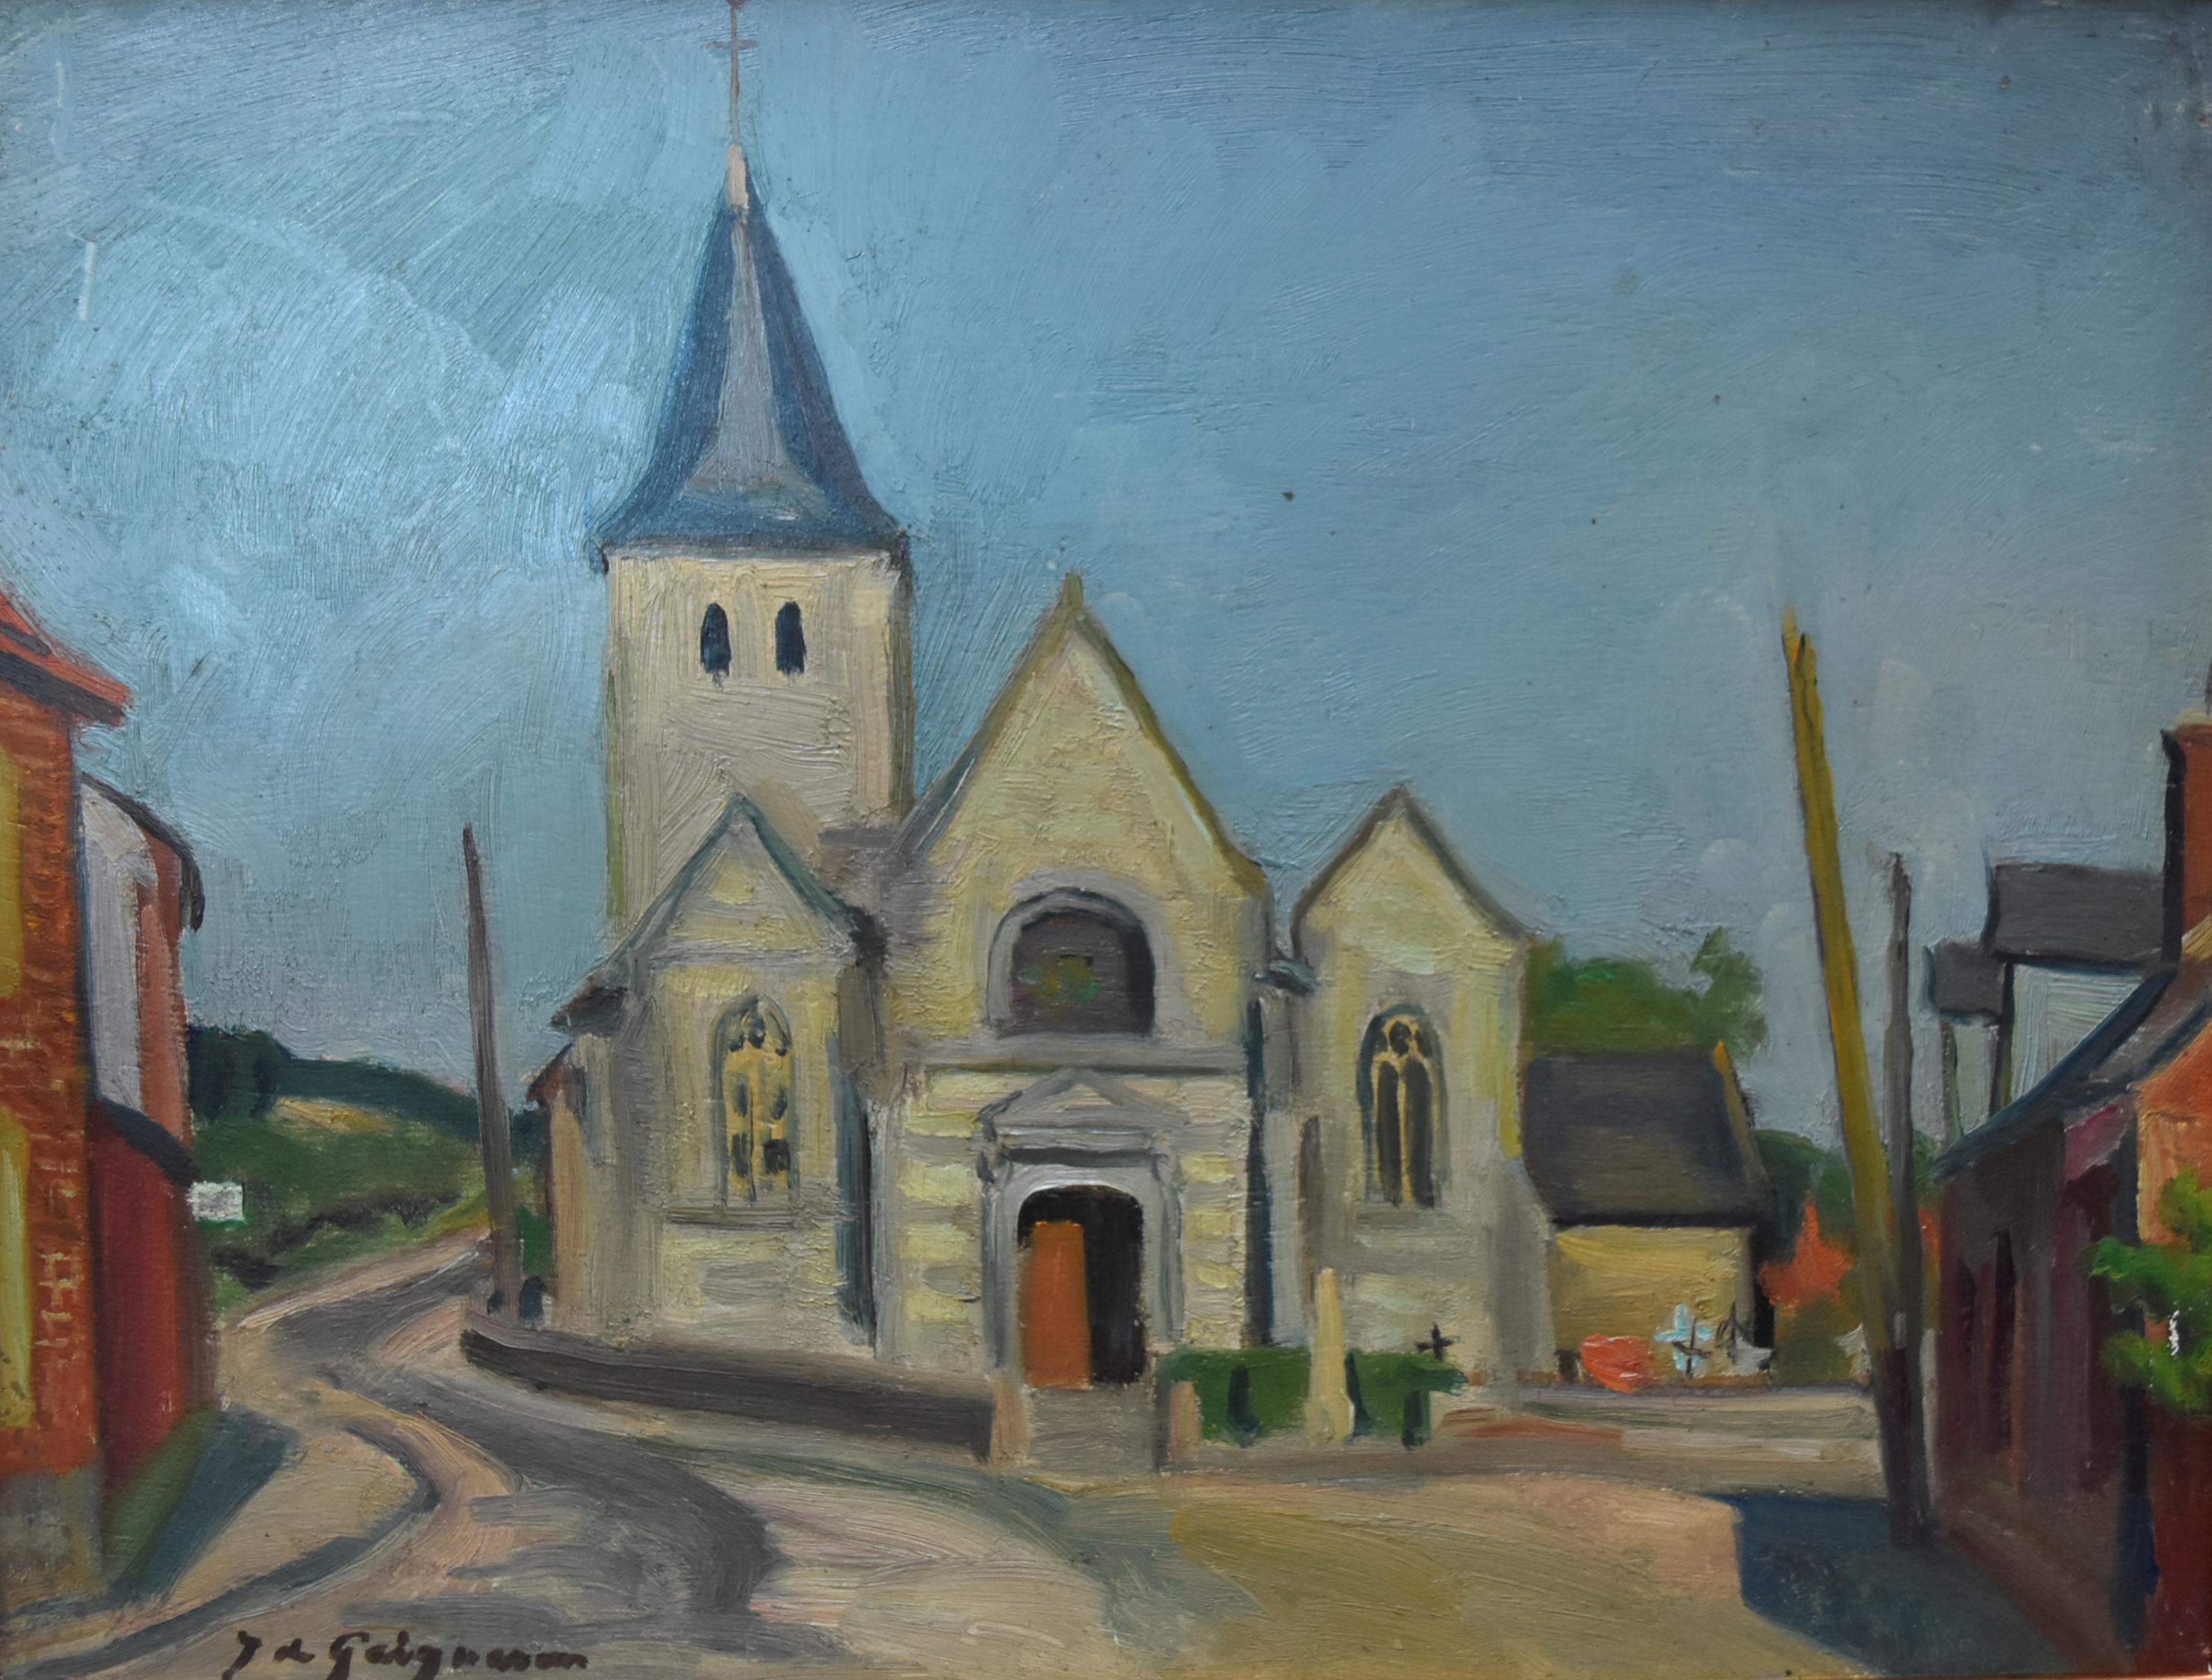 Jean de Gaigneron (1890-1976)
The Church in the village
signed lower left
Oil on wooden panel
27 x 35 cm
Modern frame : 39 x 47 cm
Provenance : Estate of the Artist

In good condition, a very tiny loss of painting on the lower right border and some